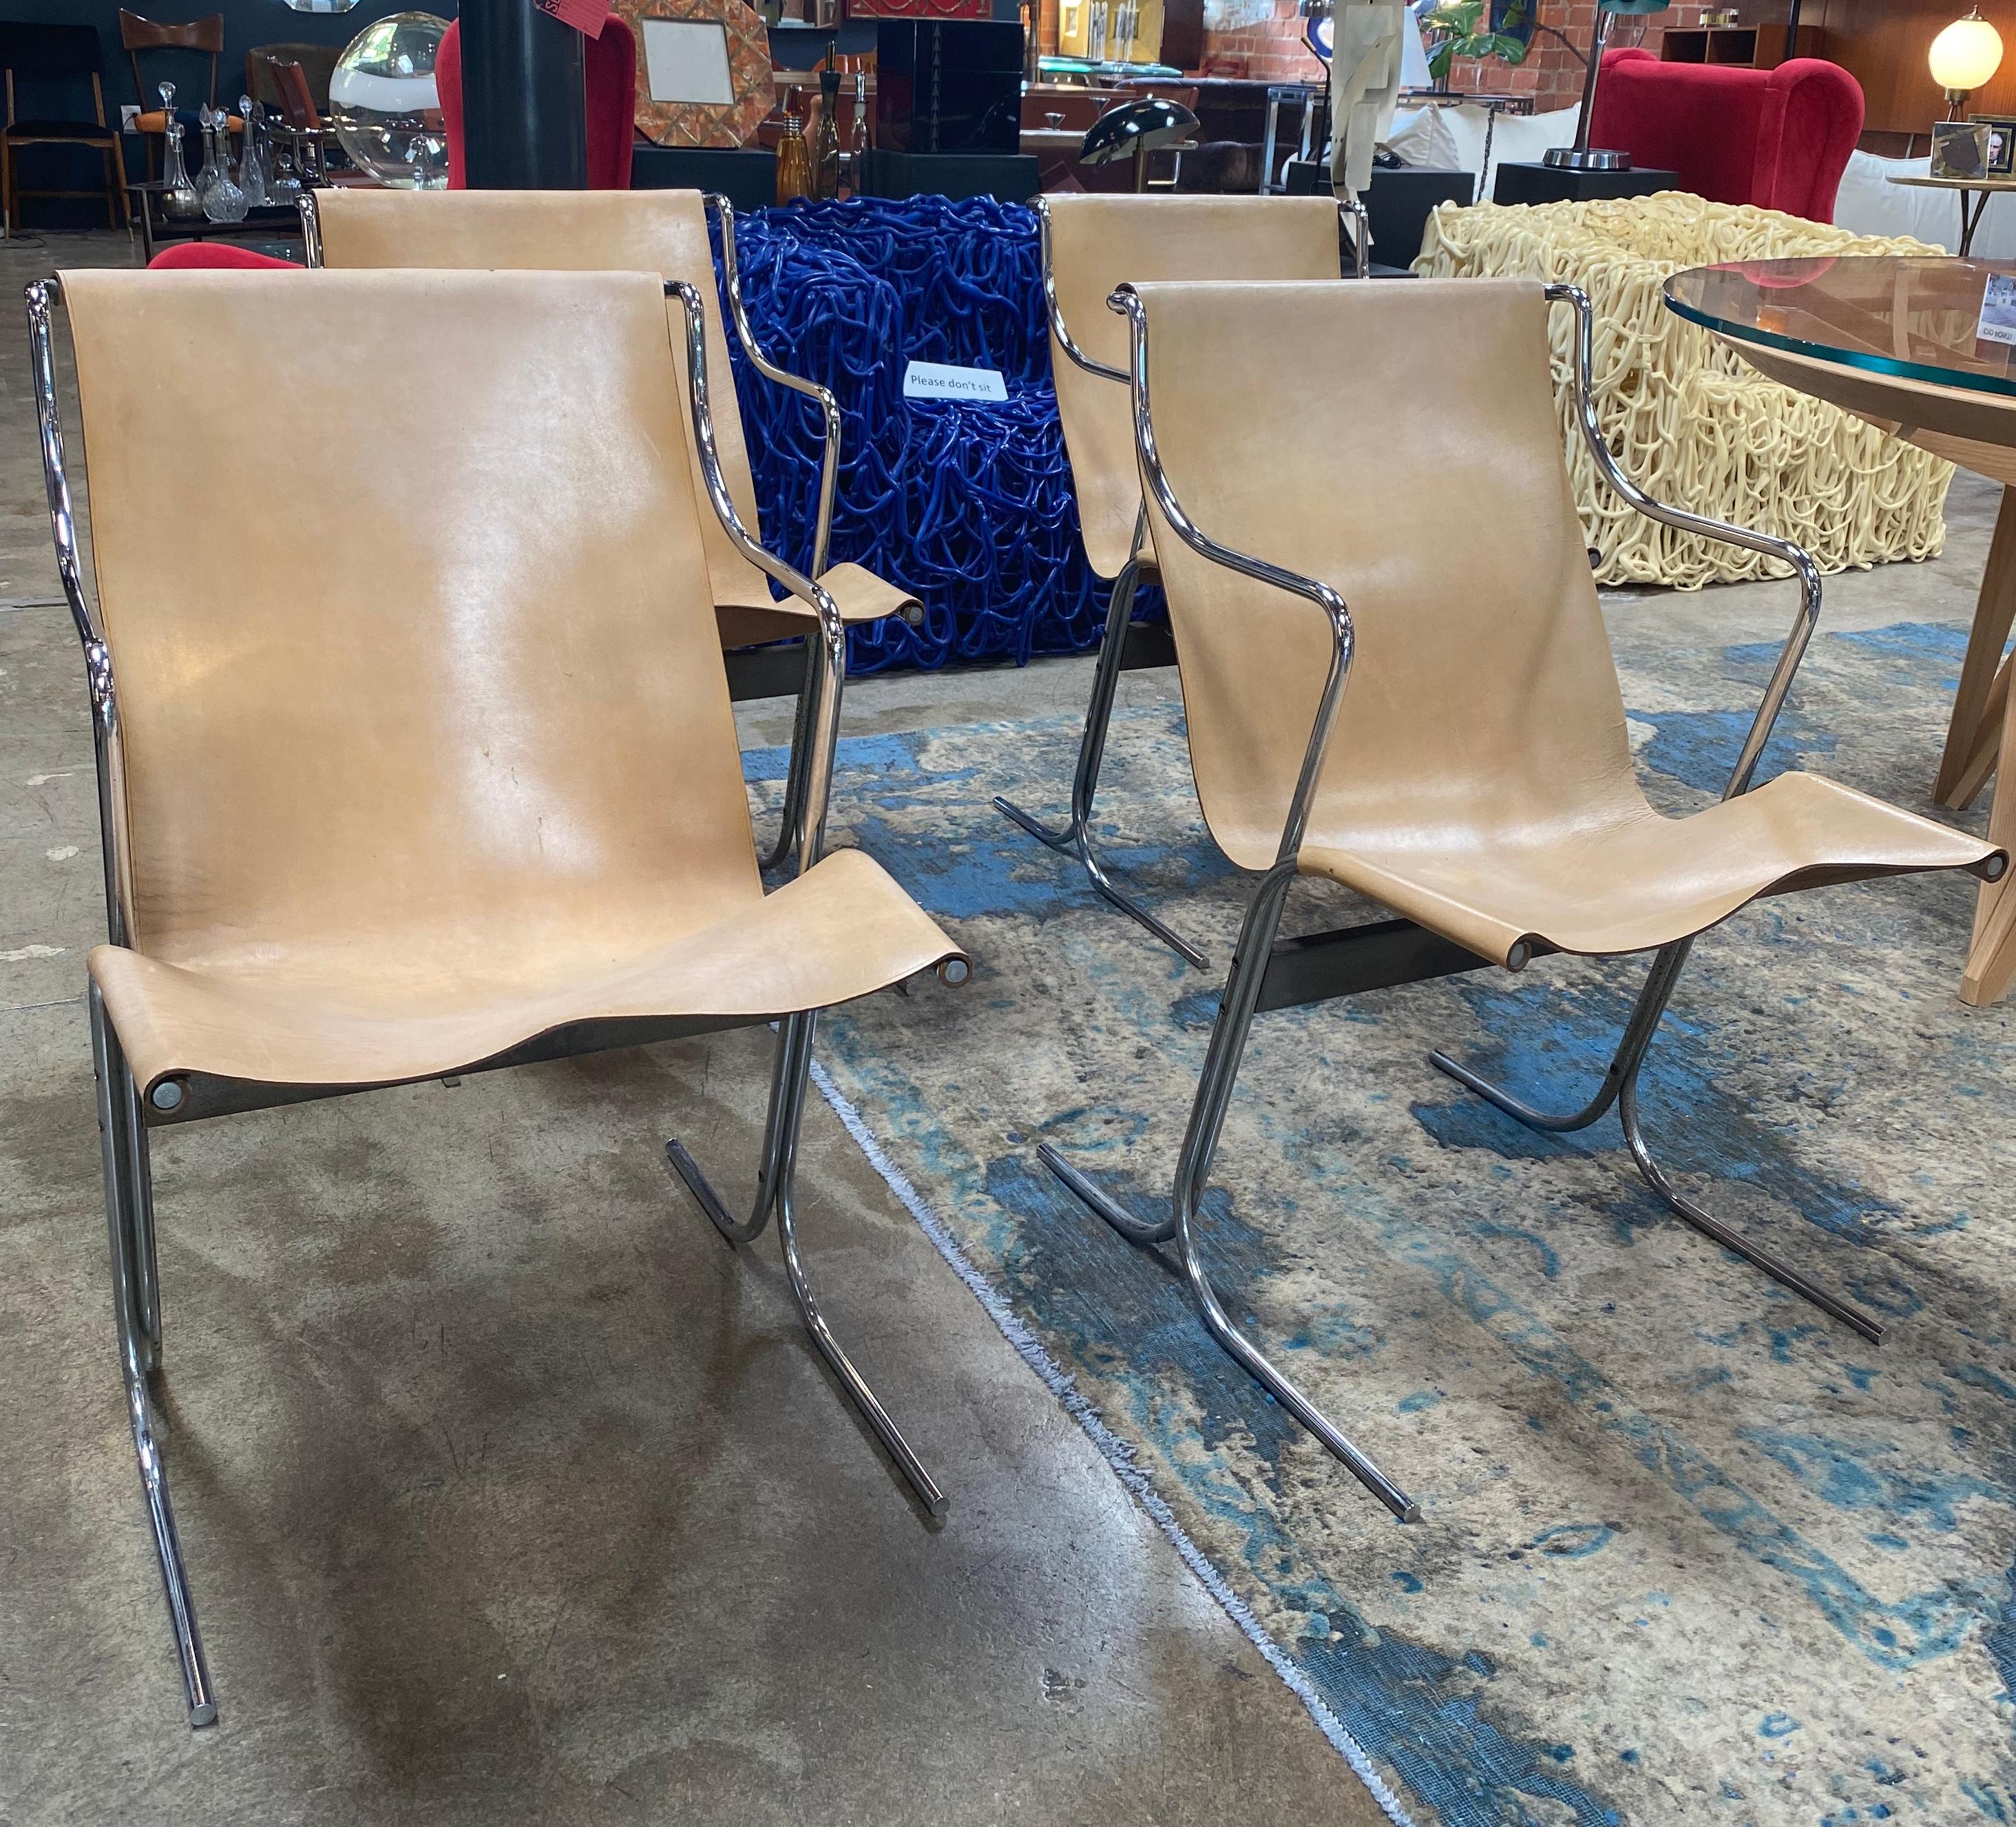 Groovy set of four lounge chairs designed by Ross Littell and manufactured by ICF De Padova, Milan (approx. 1960s).
The lounge chairs are in Minimalist style.
In beautiful very good vintage condition the light brown handcrafted leather, while the